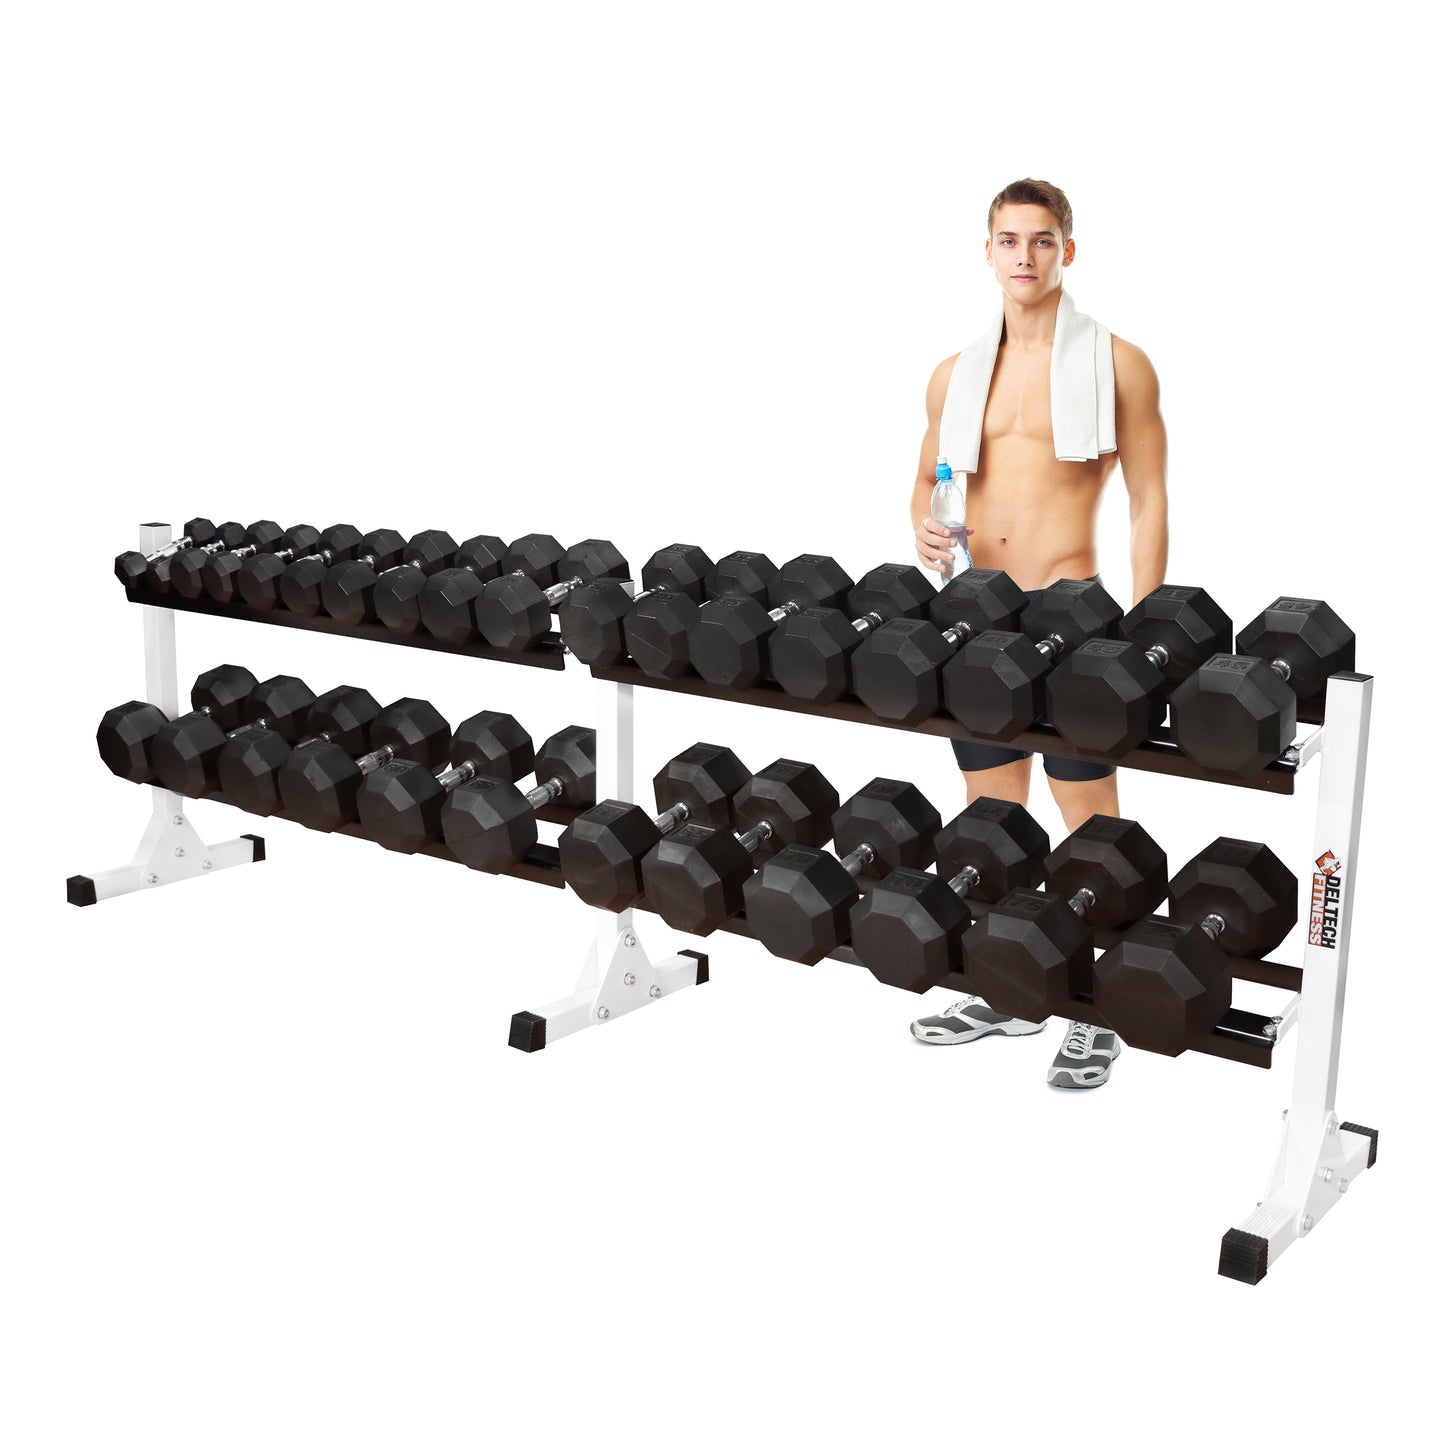 8 Foot Two Tier Dumbbell Rack